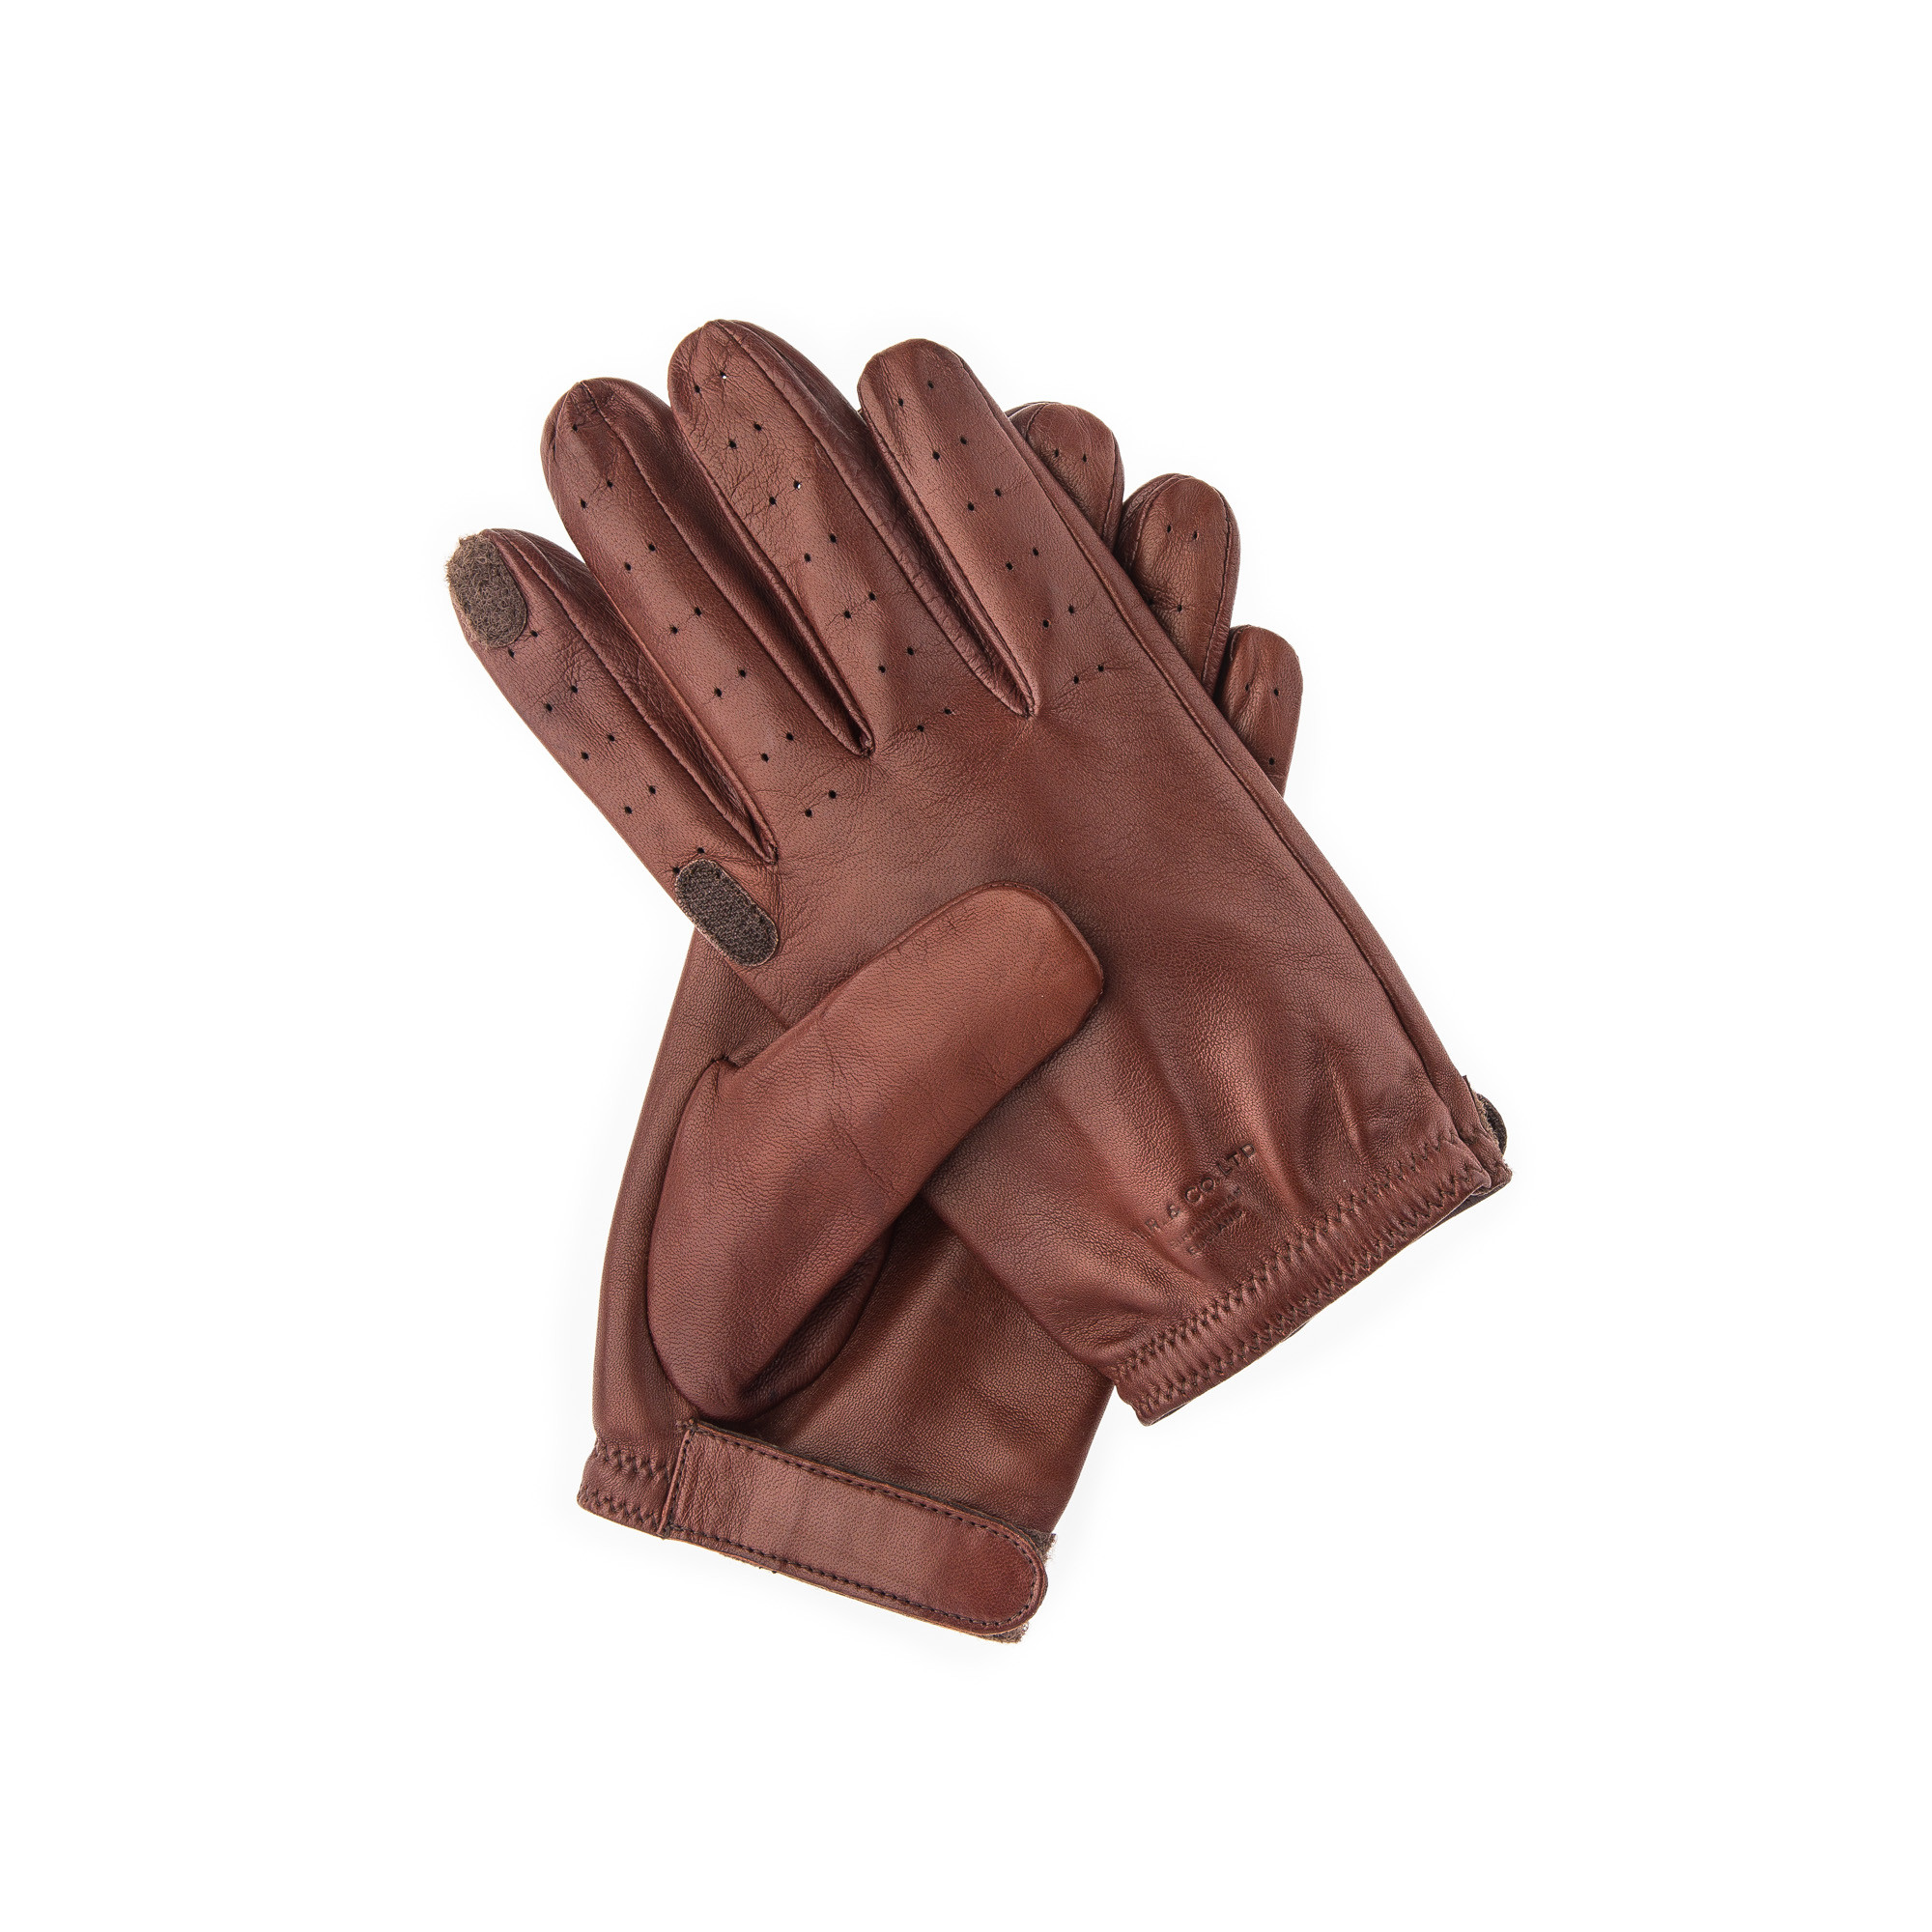 Westley Richards Perforated Leather Shooting Gloves - LH